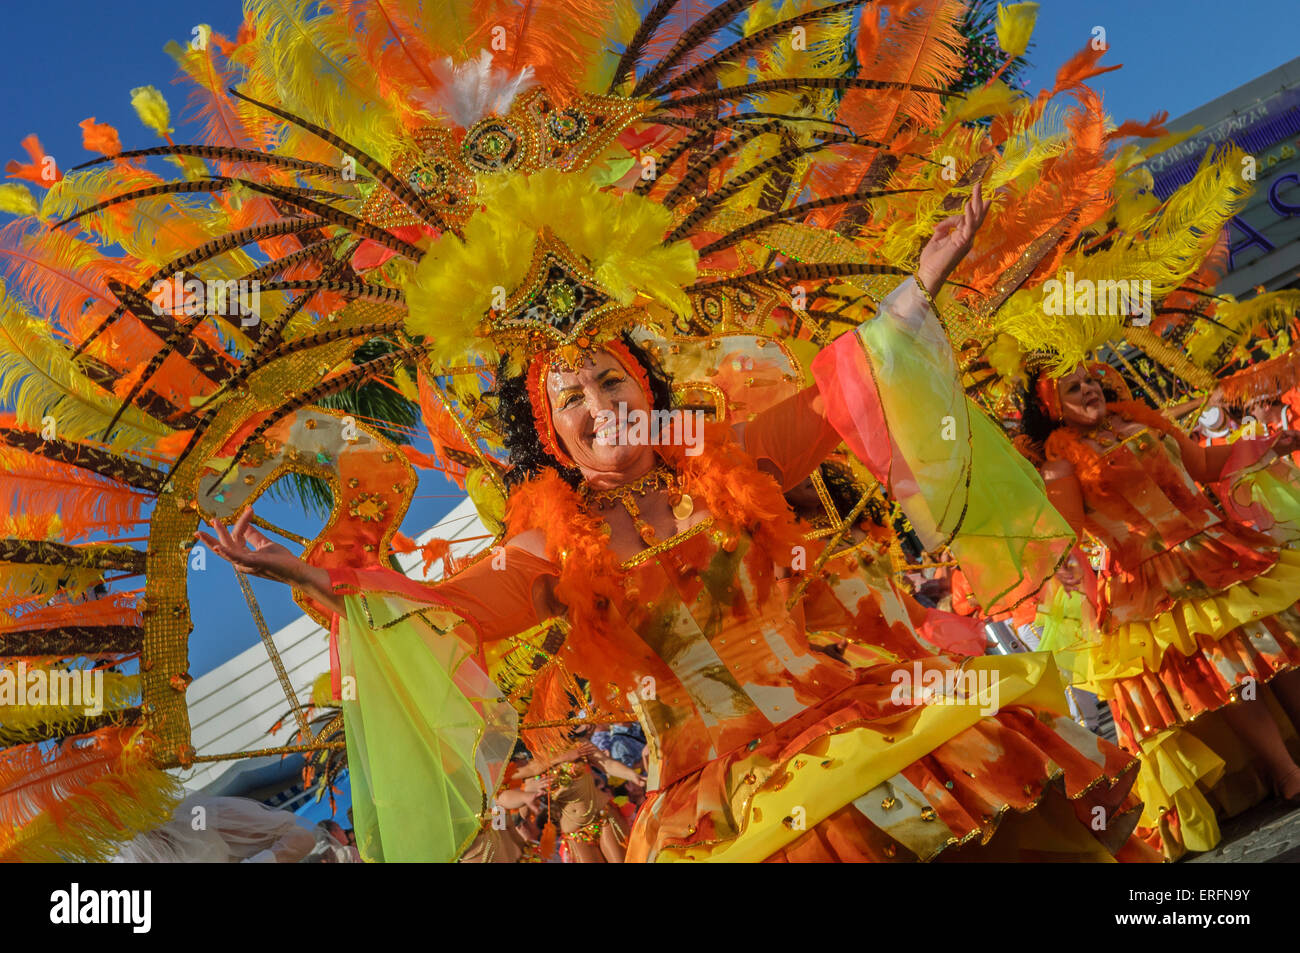 Carnival Extravaganza High Resolution Stock Photography and Images - Alamy